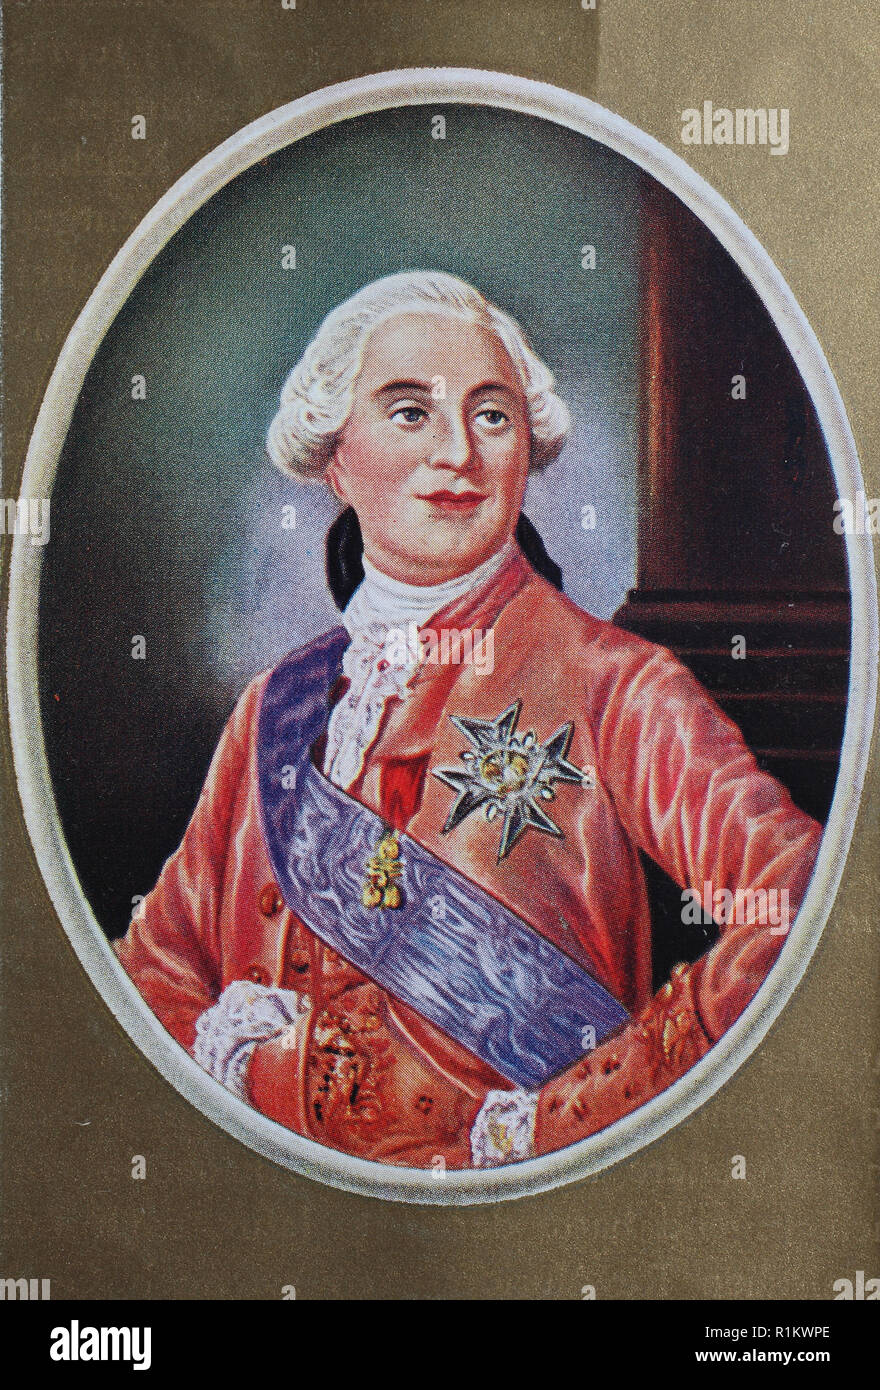 Digital improved reproduction, Louis XVI, 1754-1793, born Louis-Auguste, was the last King of France before the fall of the monarchy during the French Revolution Stock Photo